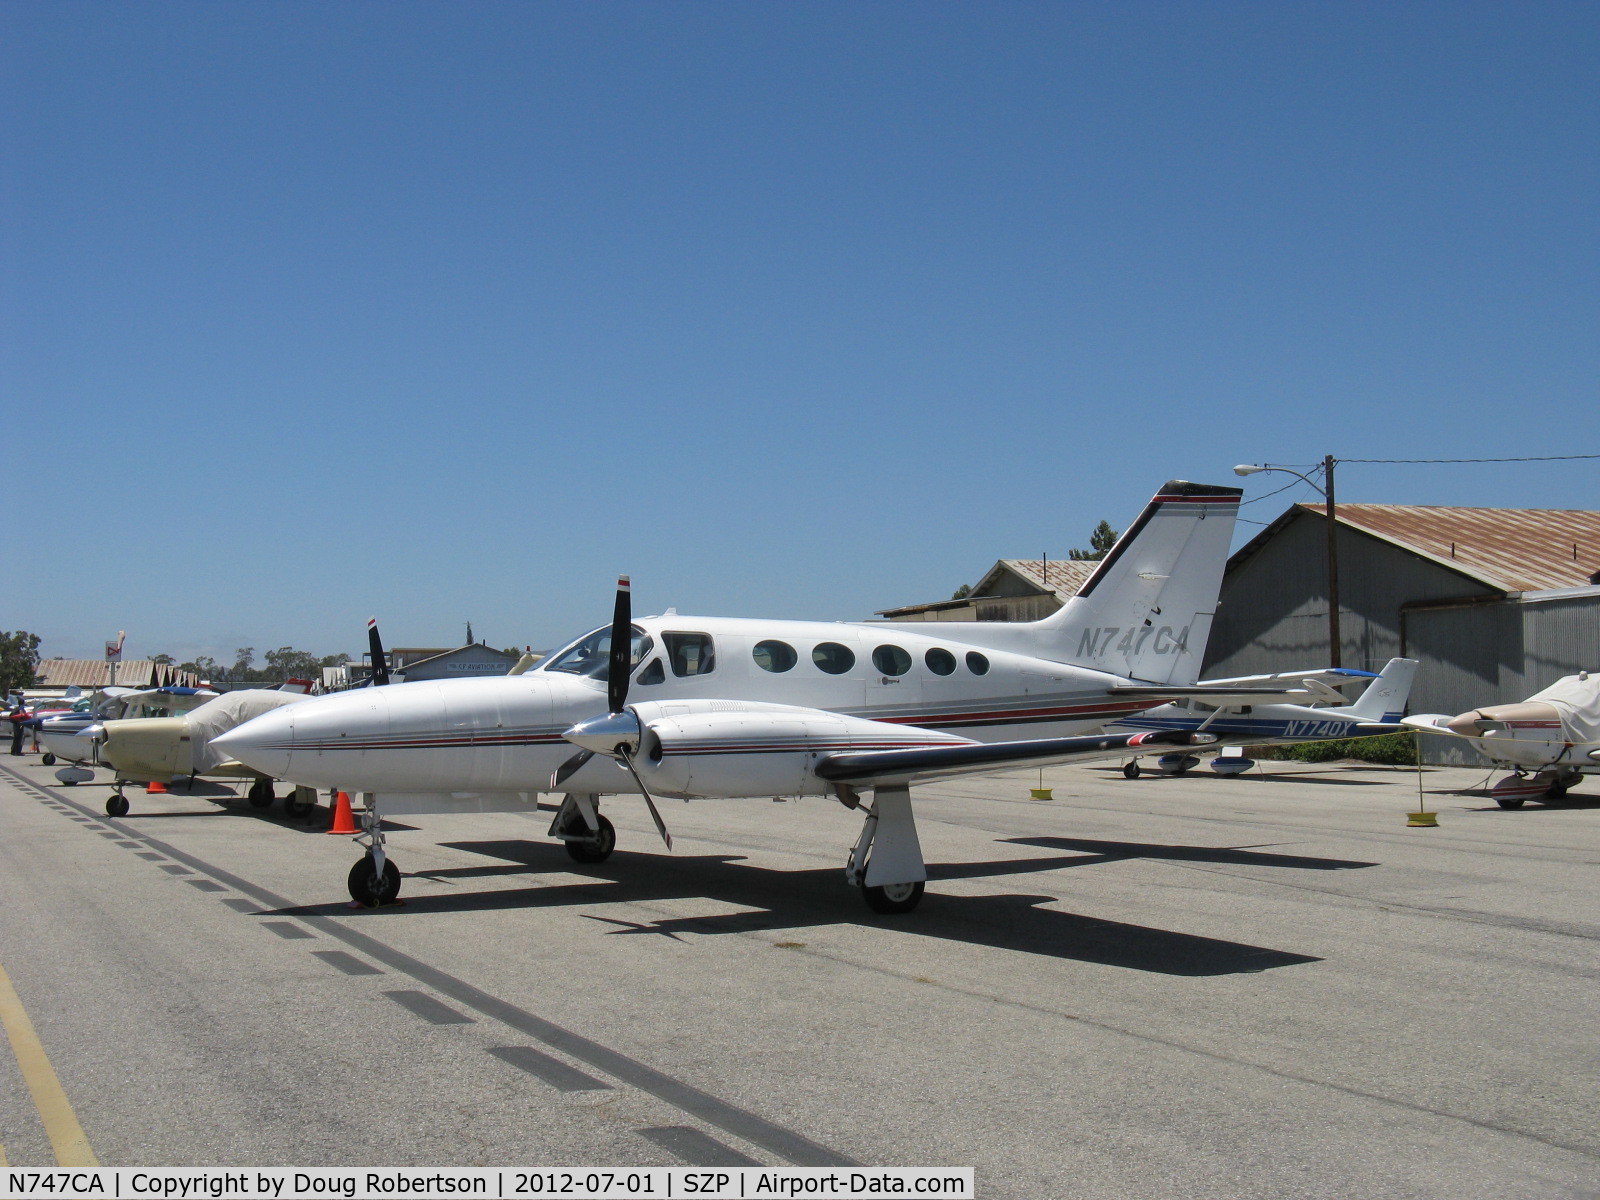 N747CA, Cessna 421C Golden Eagle C/N 421C0850, 1980 Cessna 421C GOLDEN EAGLE, Continental GTSIO-520-L & -N turbosupercharged geared counter-rotating upgrade conversion by RAM Aircraft LP, 375 Hp ea. Pressurized